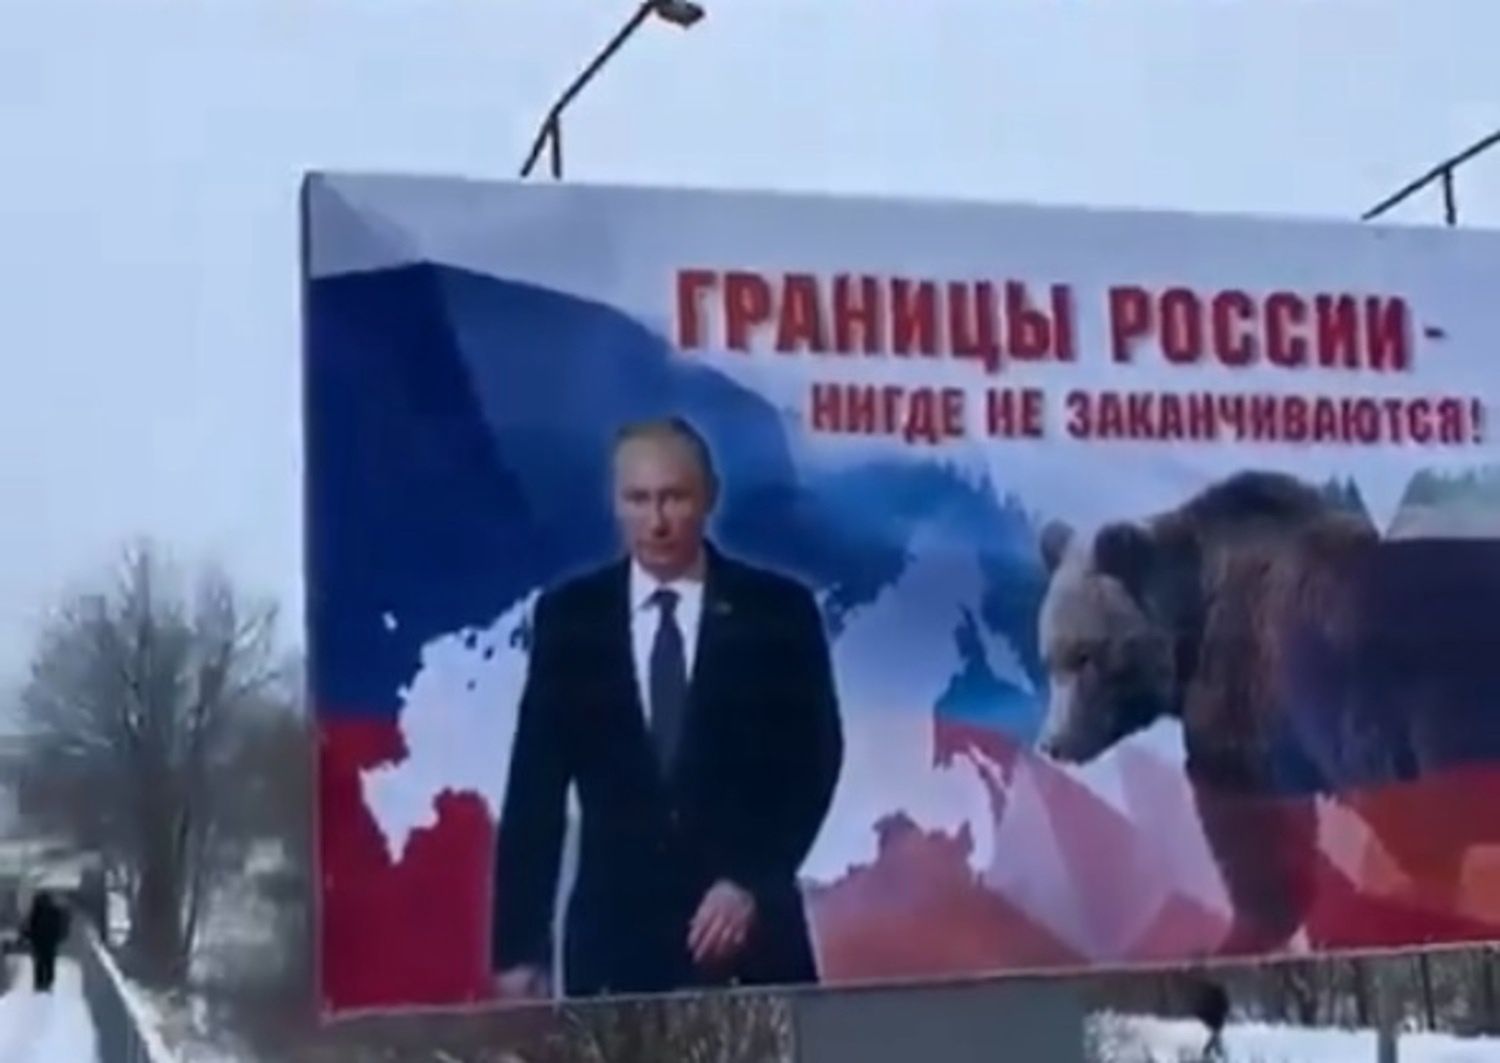 Provoking the Russians.  A banner with Putin appeared on the border